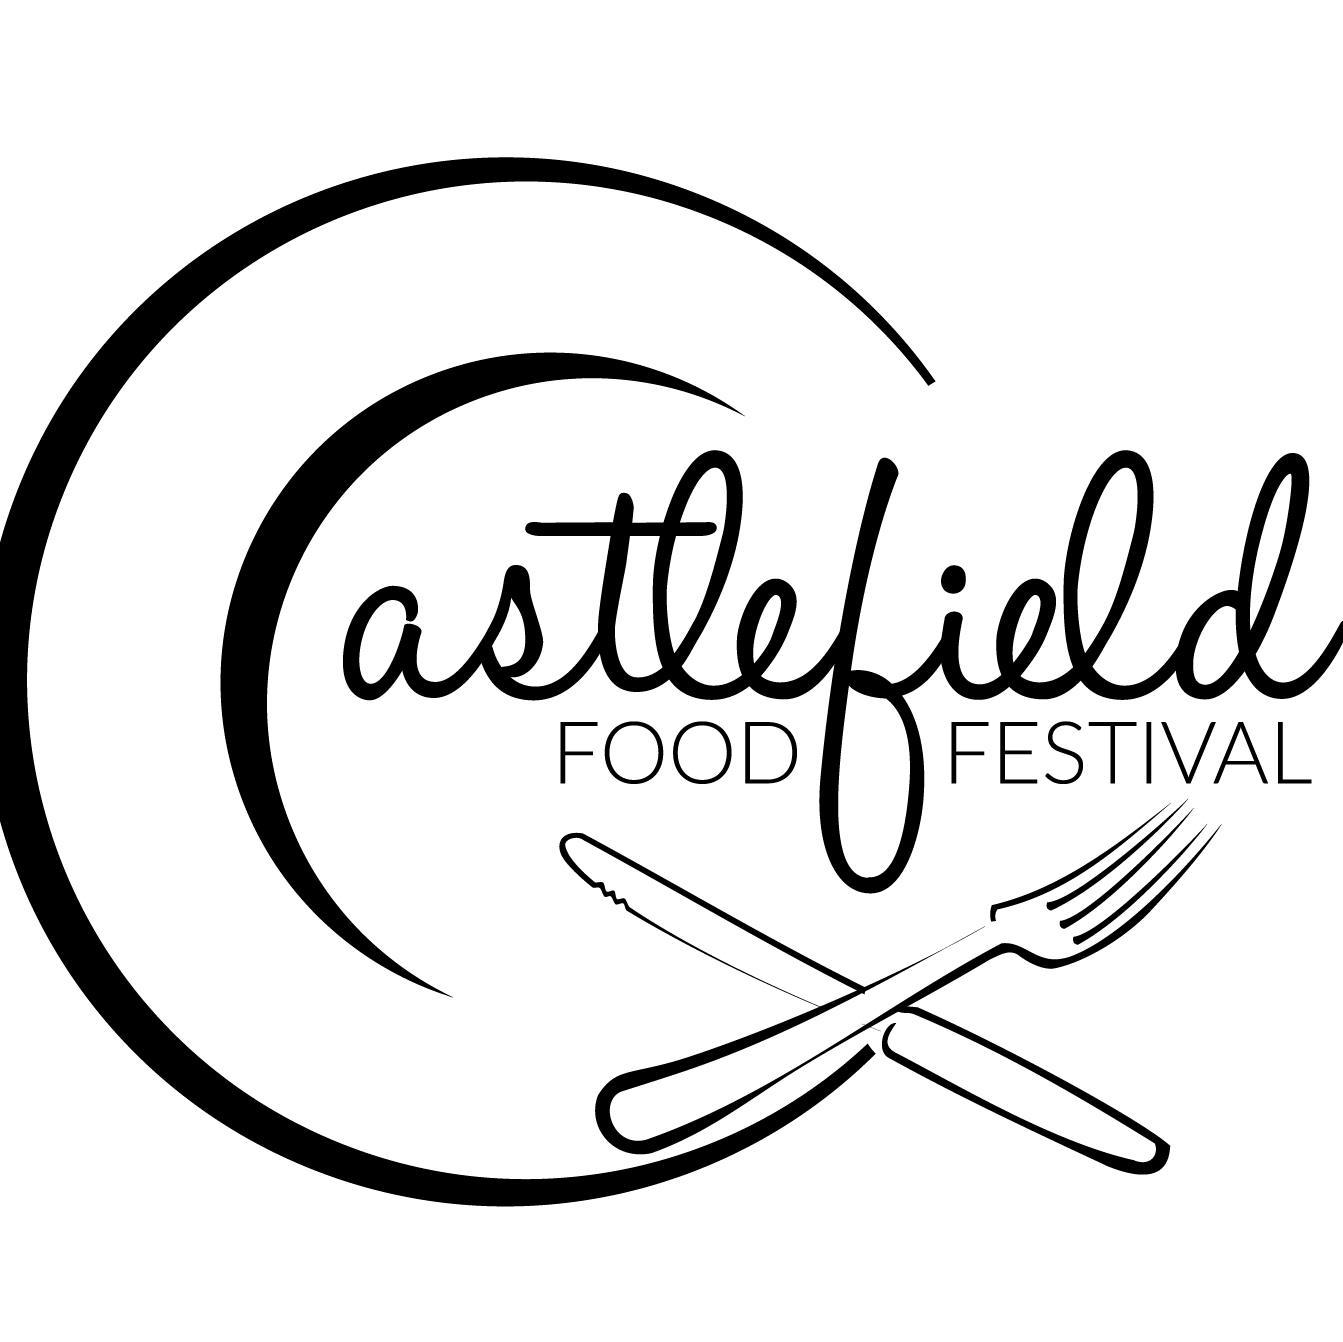 The table is set for the return of Castlefield Food Festival - Manchester. 11 - 14 May 2017 - follow for details. The North West's tastiest food festival